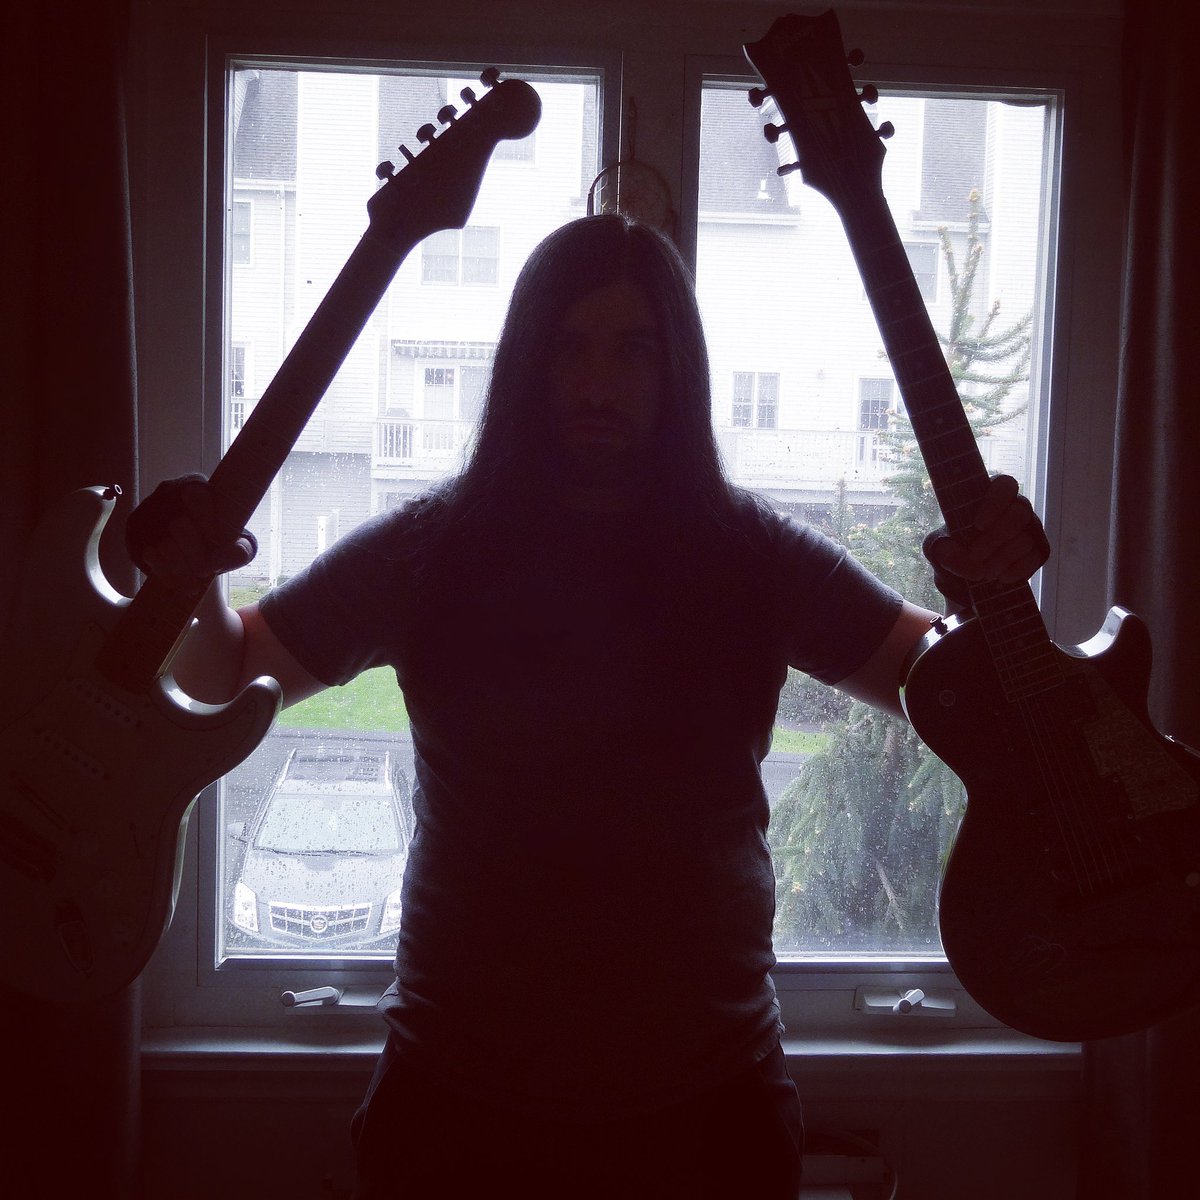 Let This Be A Day To Remember When Only One Man Stood Against Many #warrior #strong #silhouettes #artist #musician #guitars #guitarist #guitarplayer #metal #rock #cool #awesome #sweet #amazing #epic #incredible #oneagainsttheworld #ChemicalXband #RyanCarnage